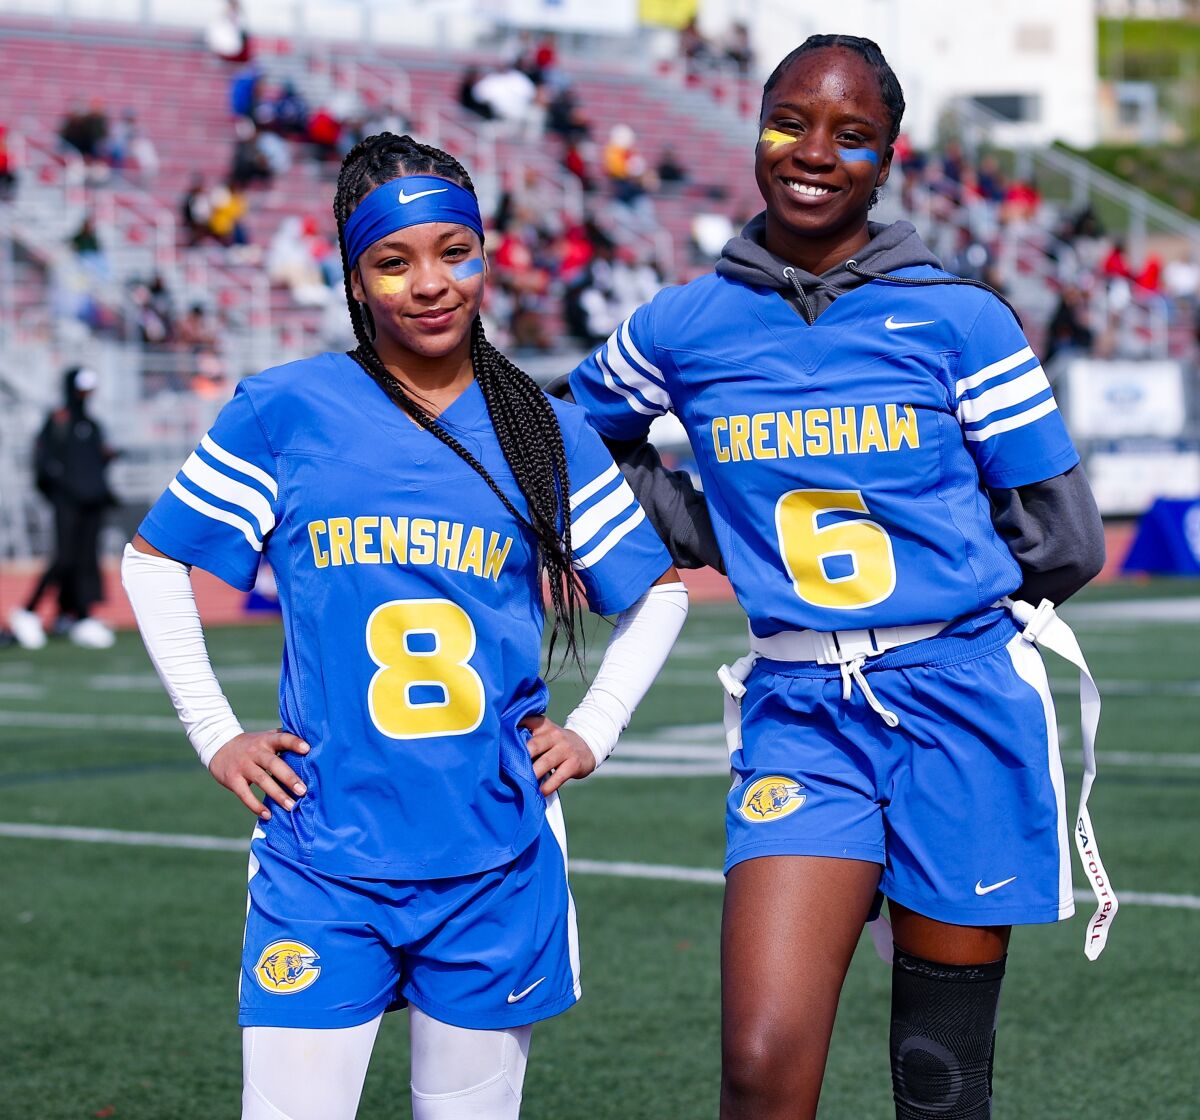 Crenshaw High running back De'Chelle Brackett and receiver Imani Taylor-Wise.